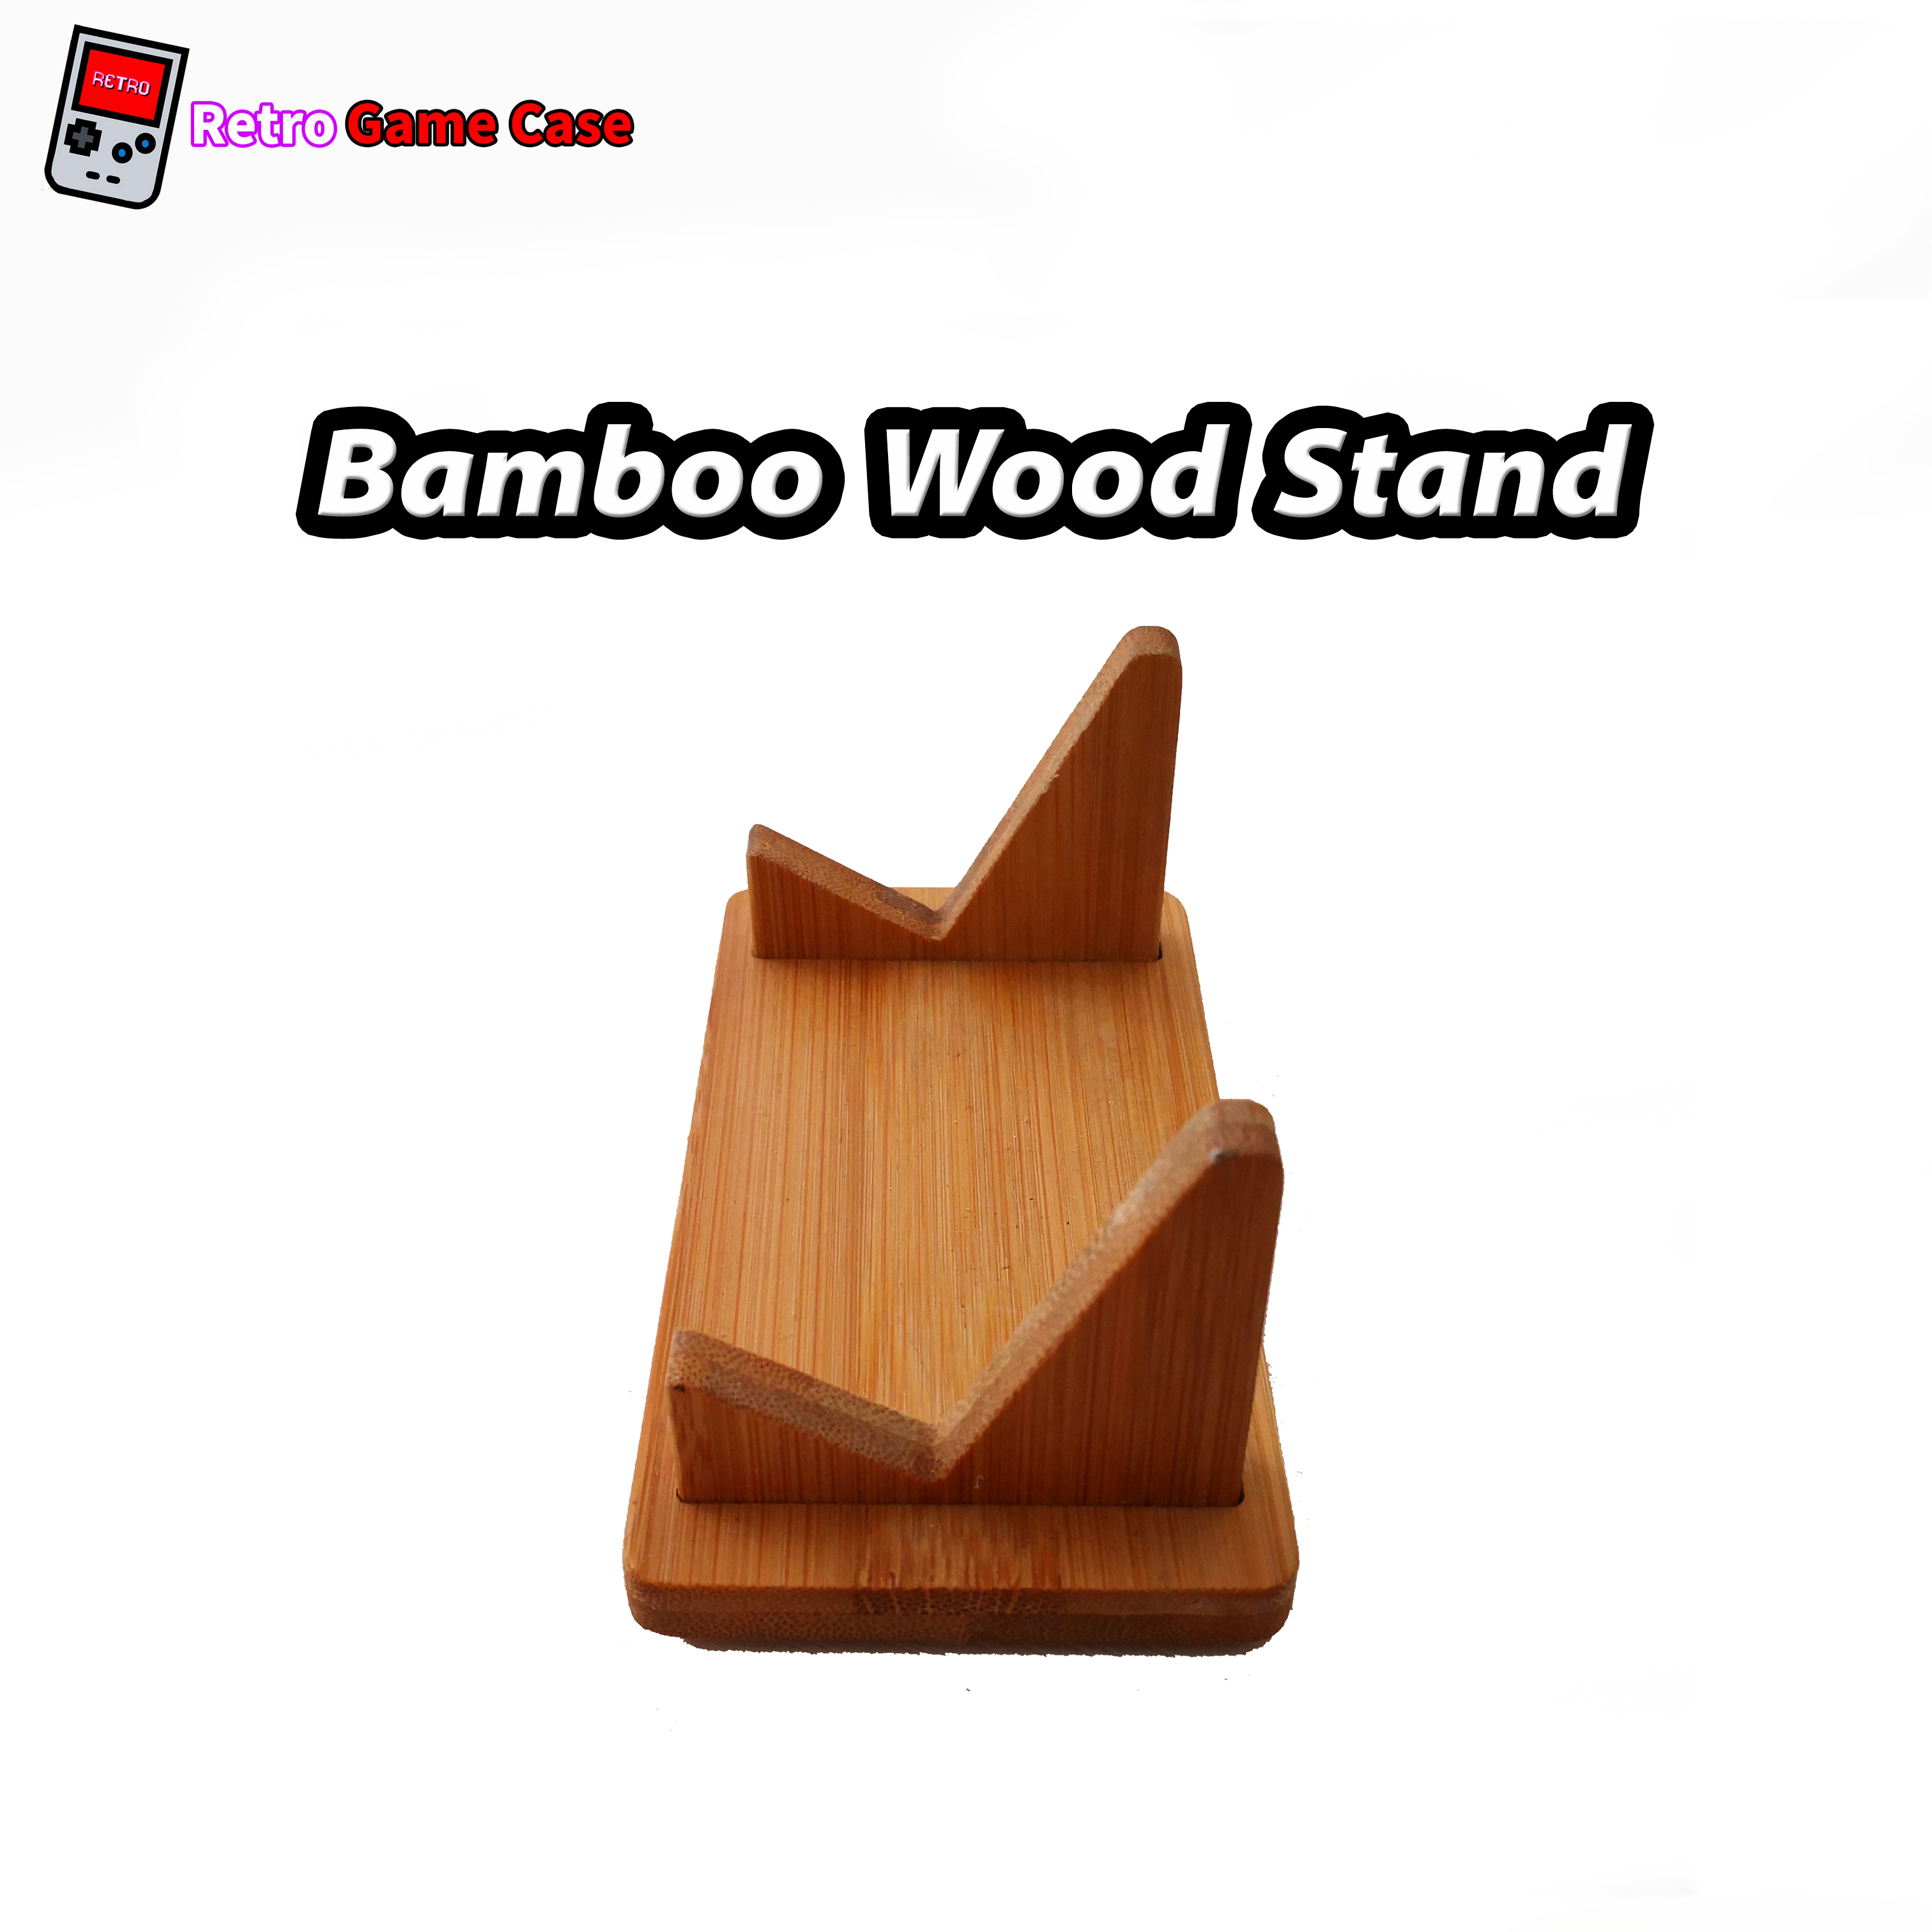 My_retro_game_case_bamboo_wood_stand_side.jpg